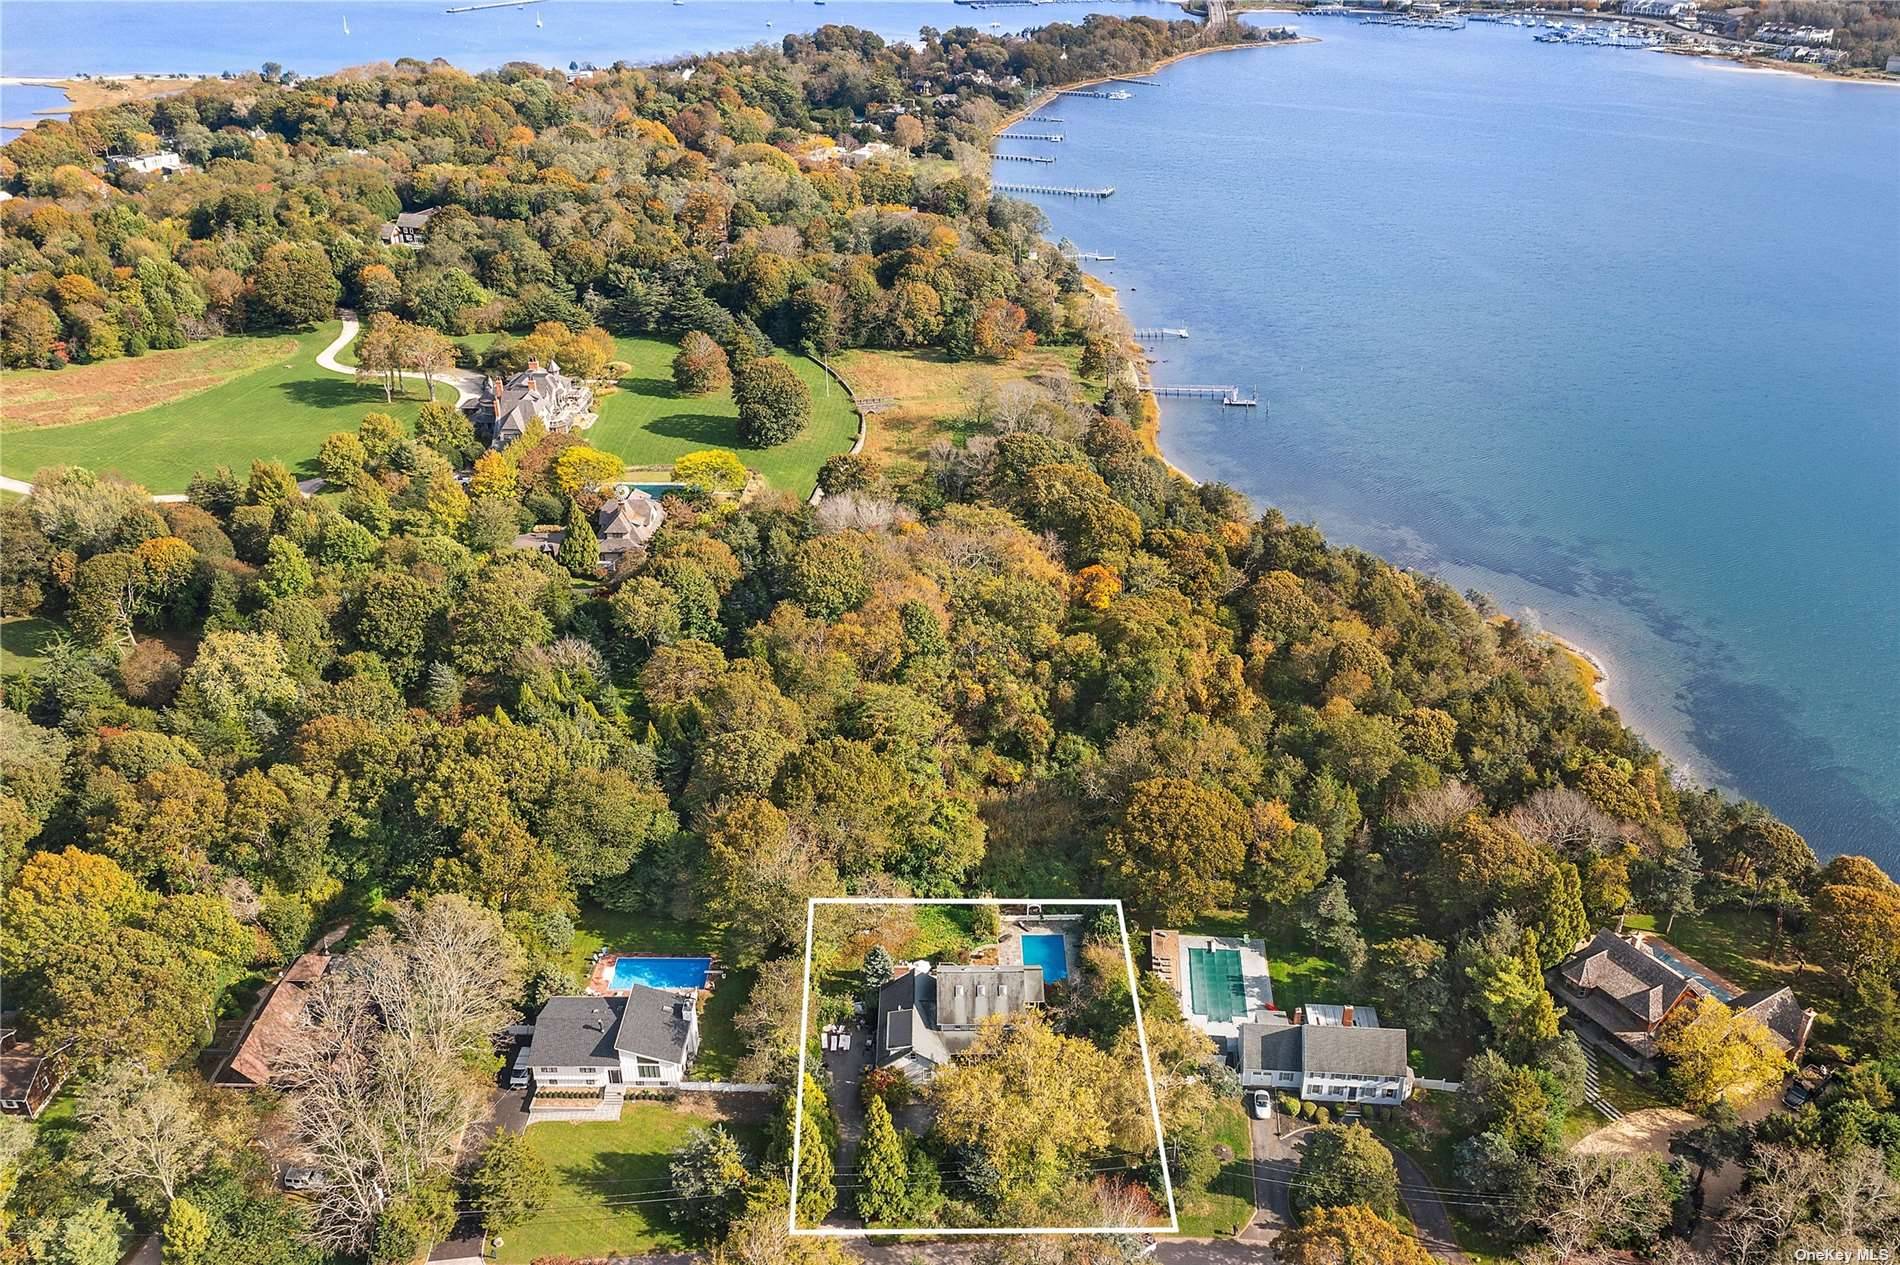 Located on a quiet cul de sac in North Haven Village, this 4 bedroom, 2 1 2 bath home has your own private dock directly on Sag Harbor Cove with ...